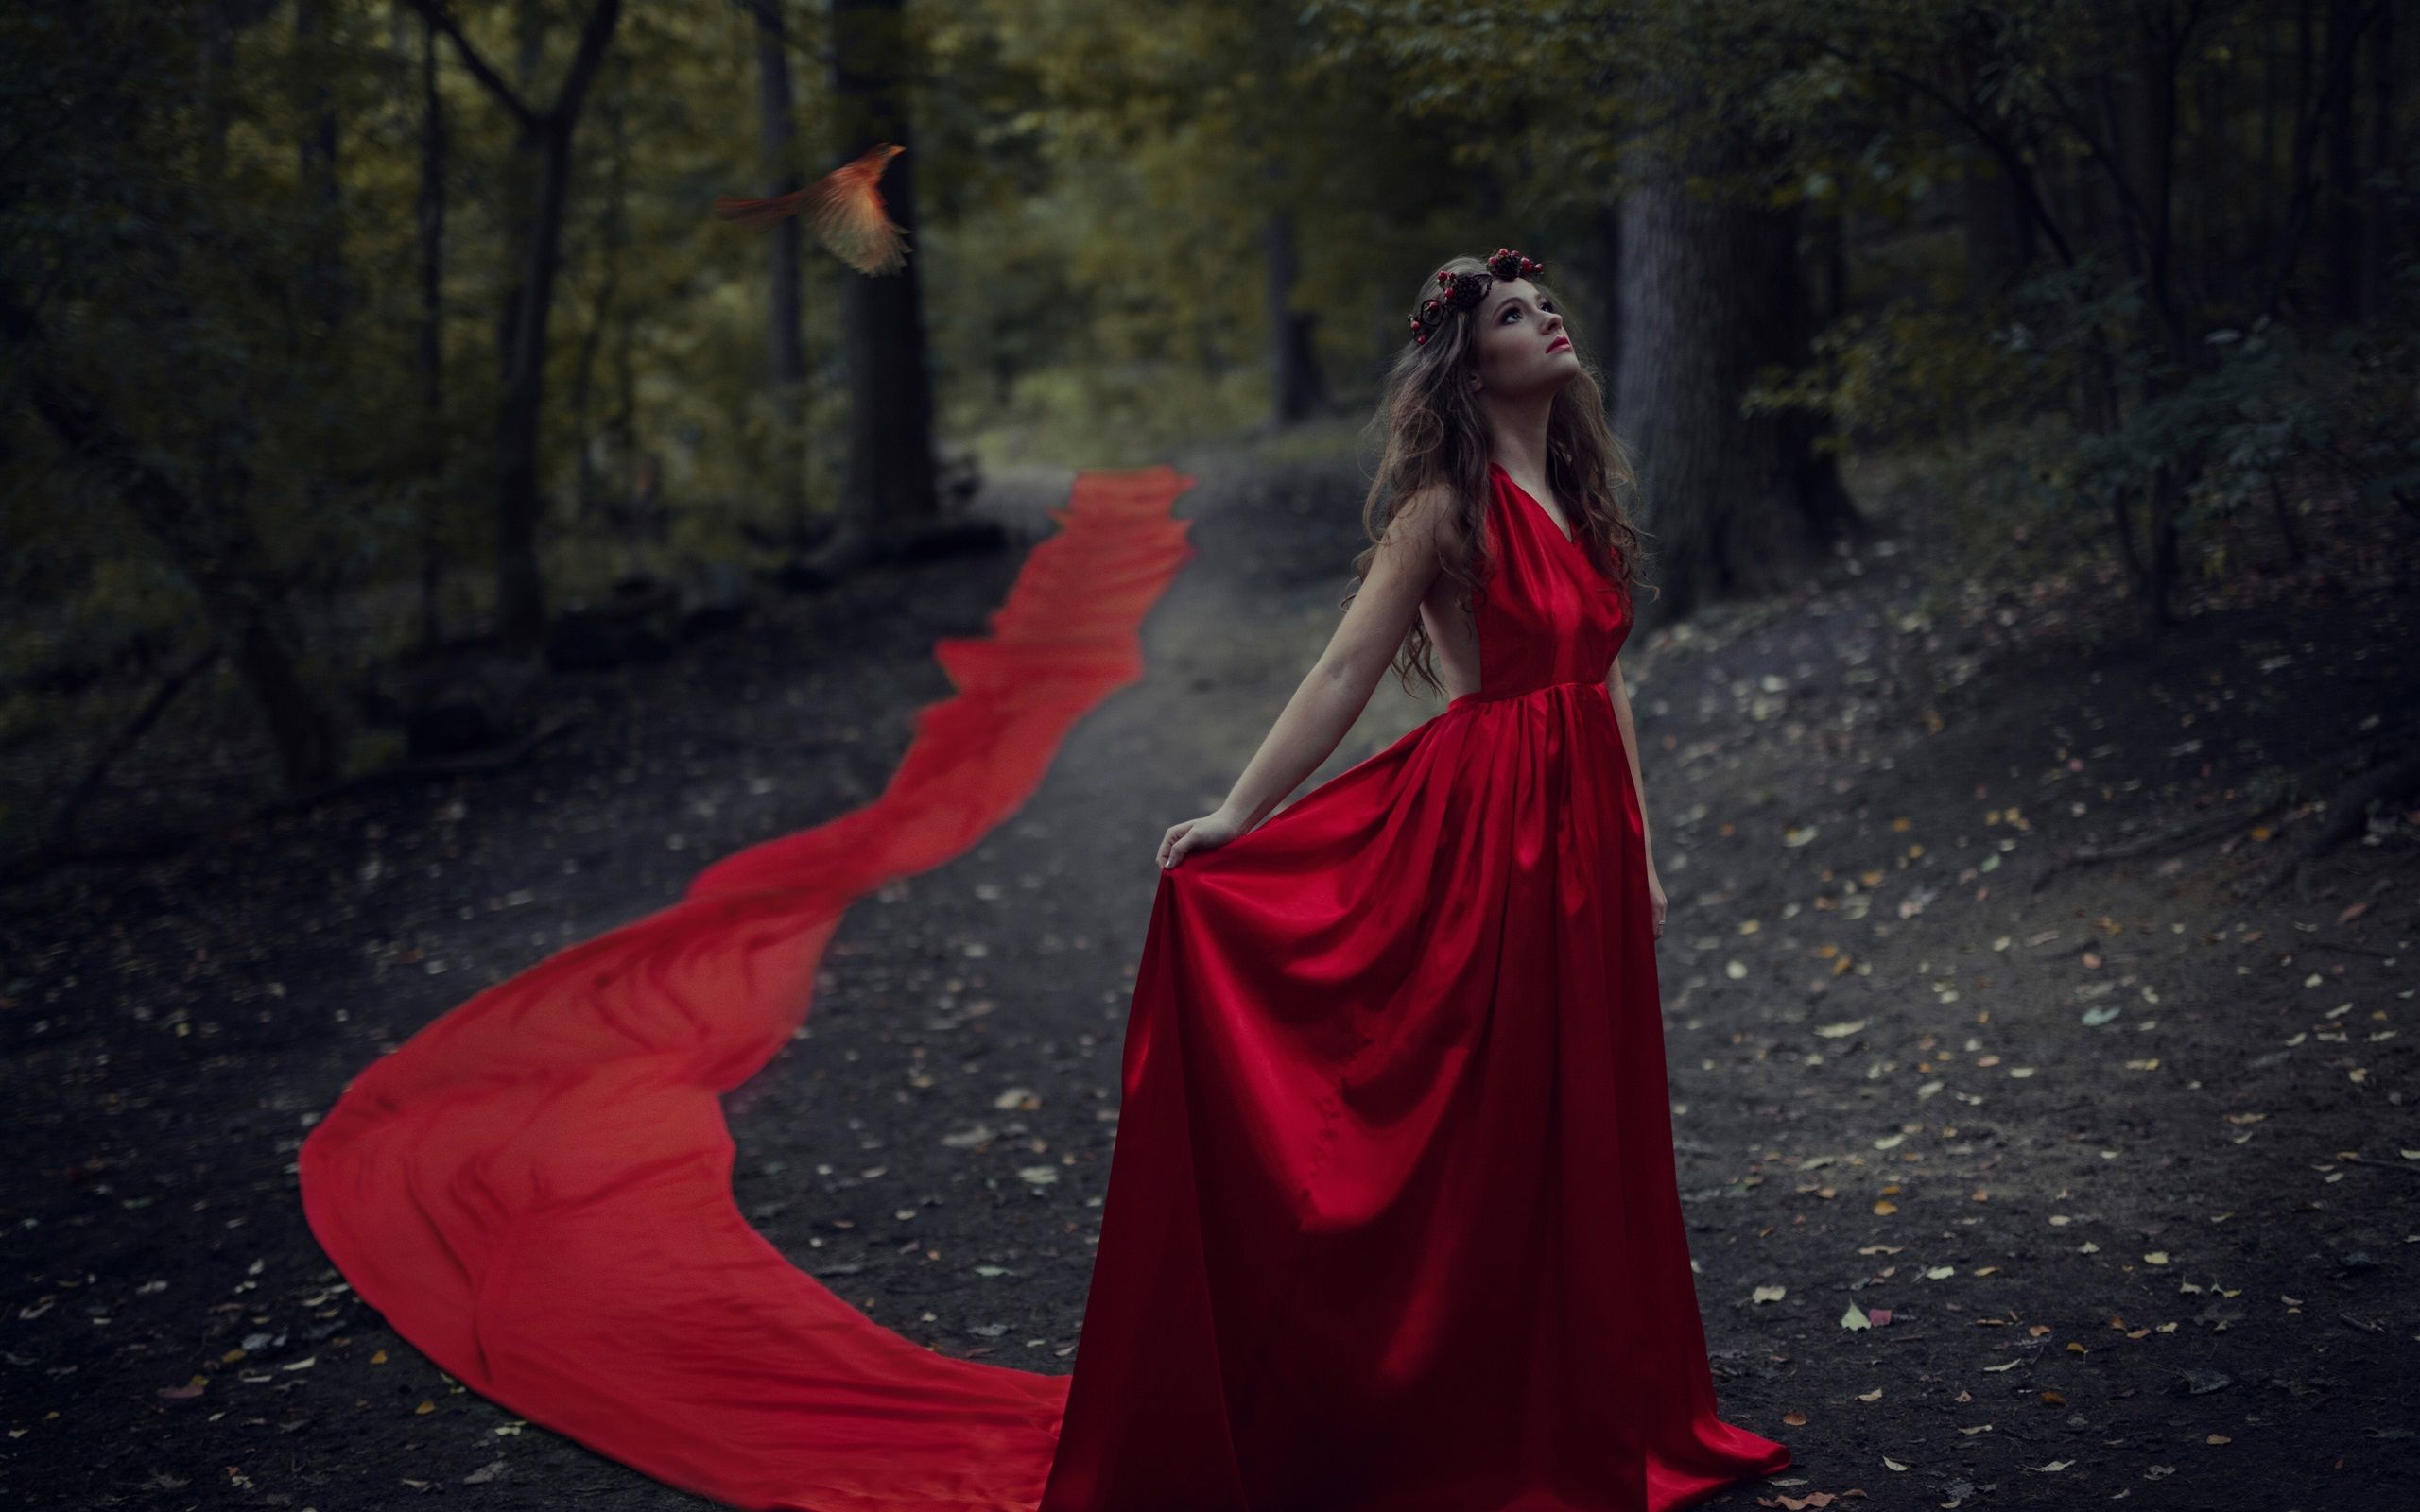 Free download Wallpaper Red dress girl in the forest bird dusk